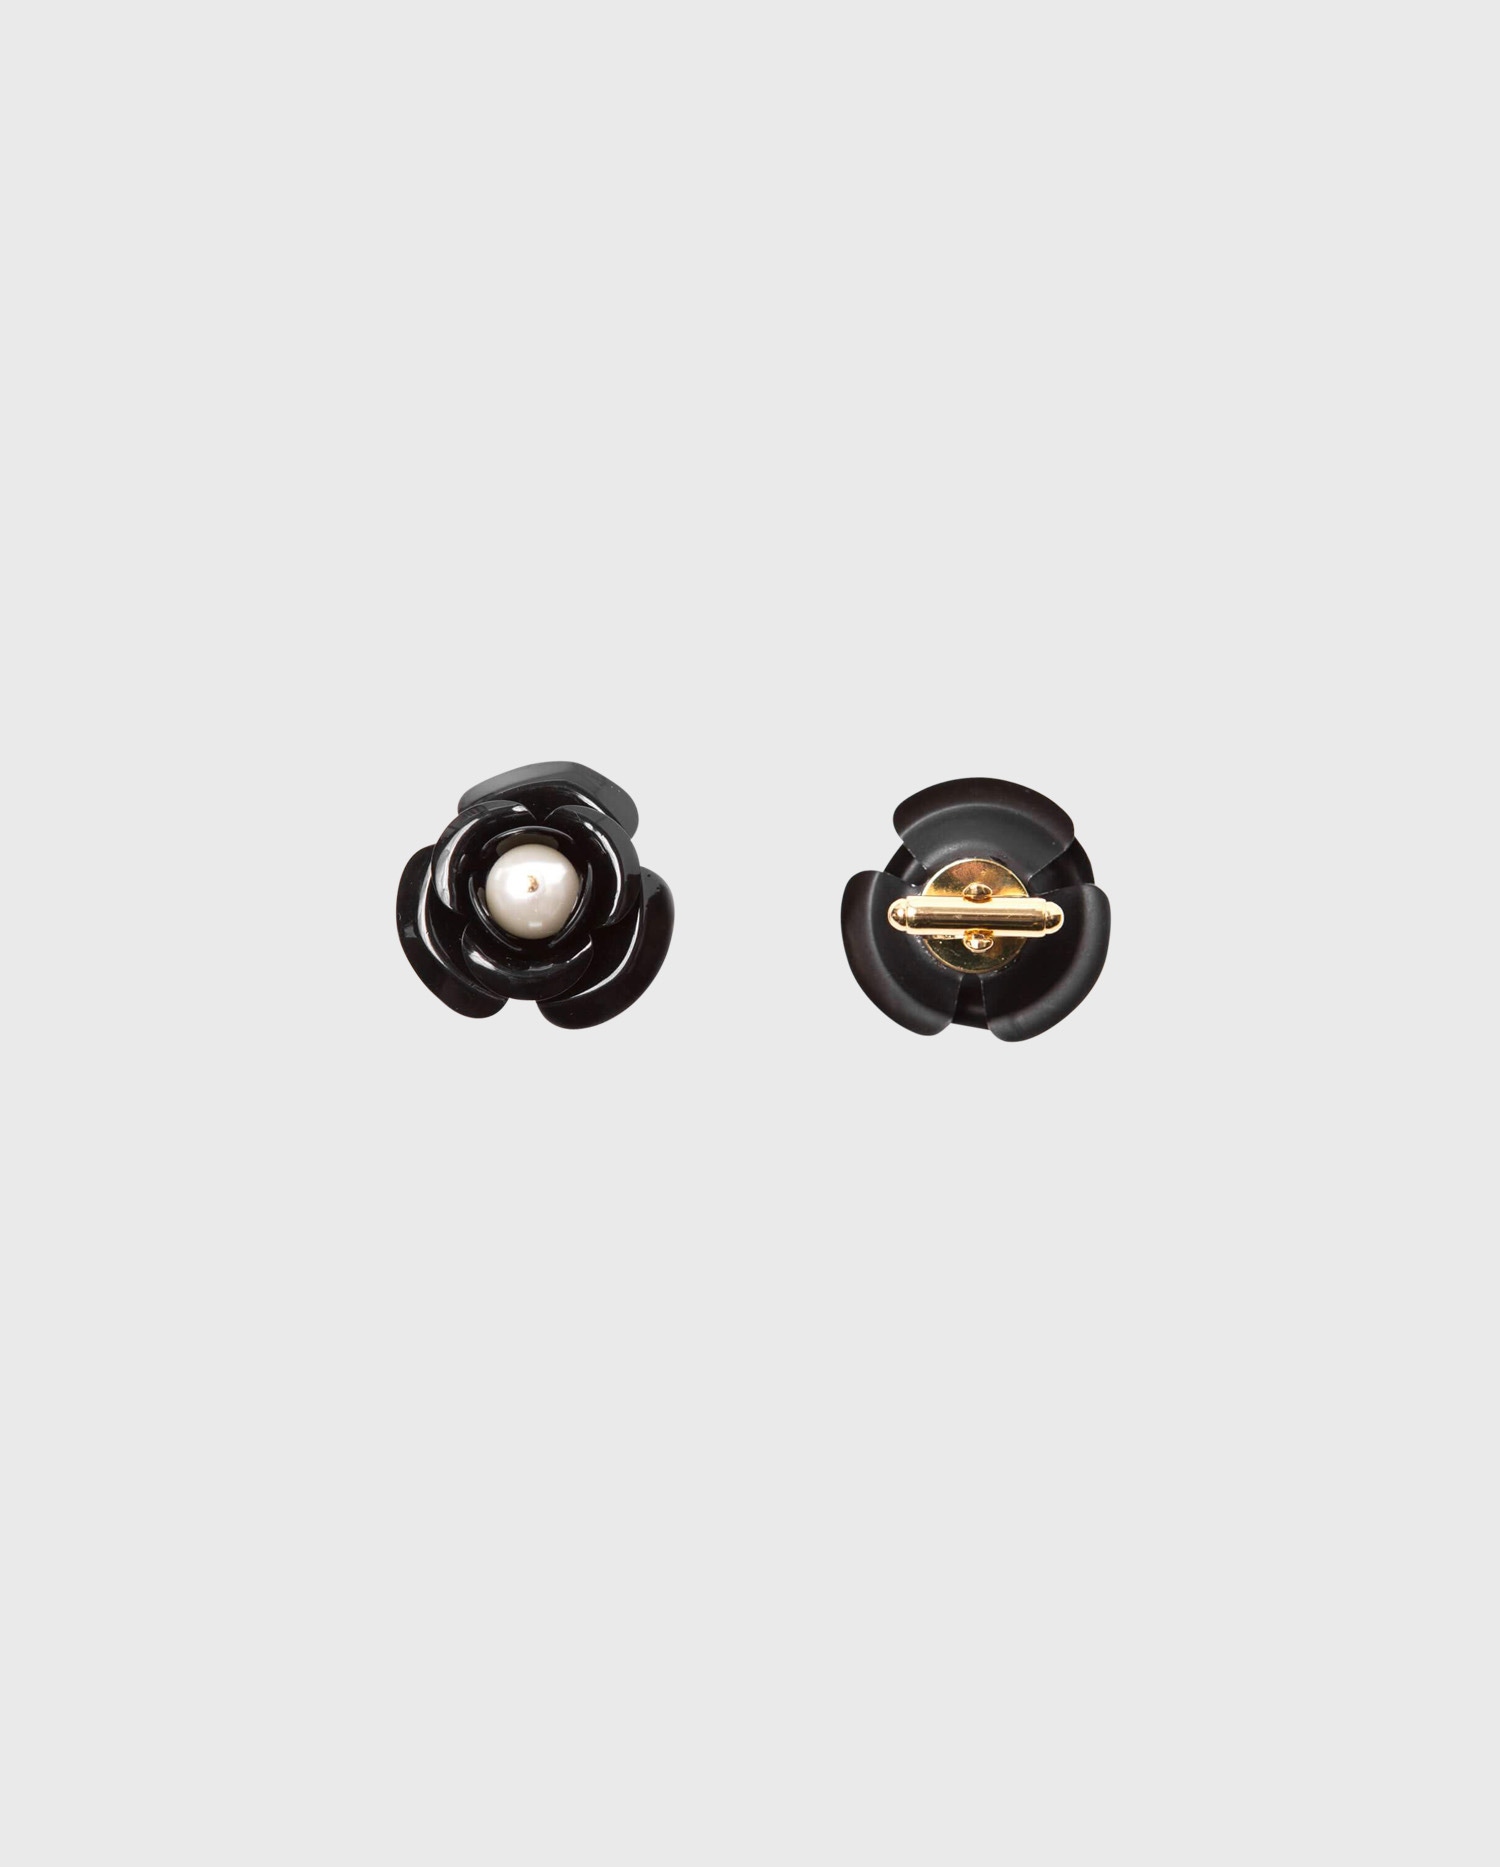 Discover The ILON Floral and Pearl cufflinks with a light gold finish from ANNE FONTAINE